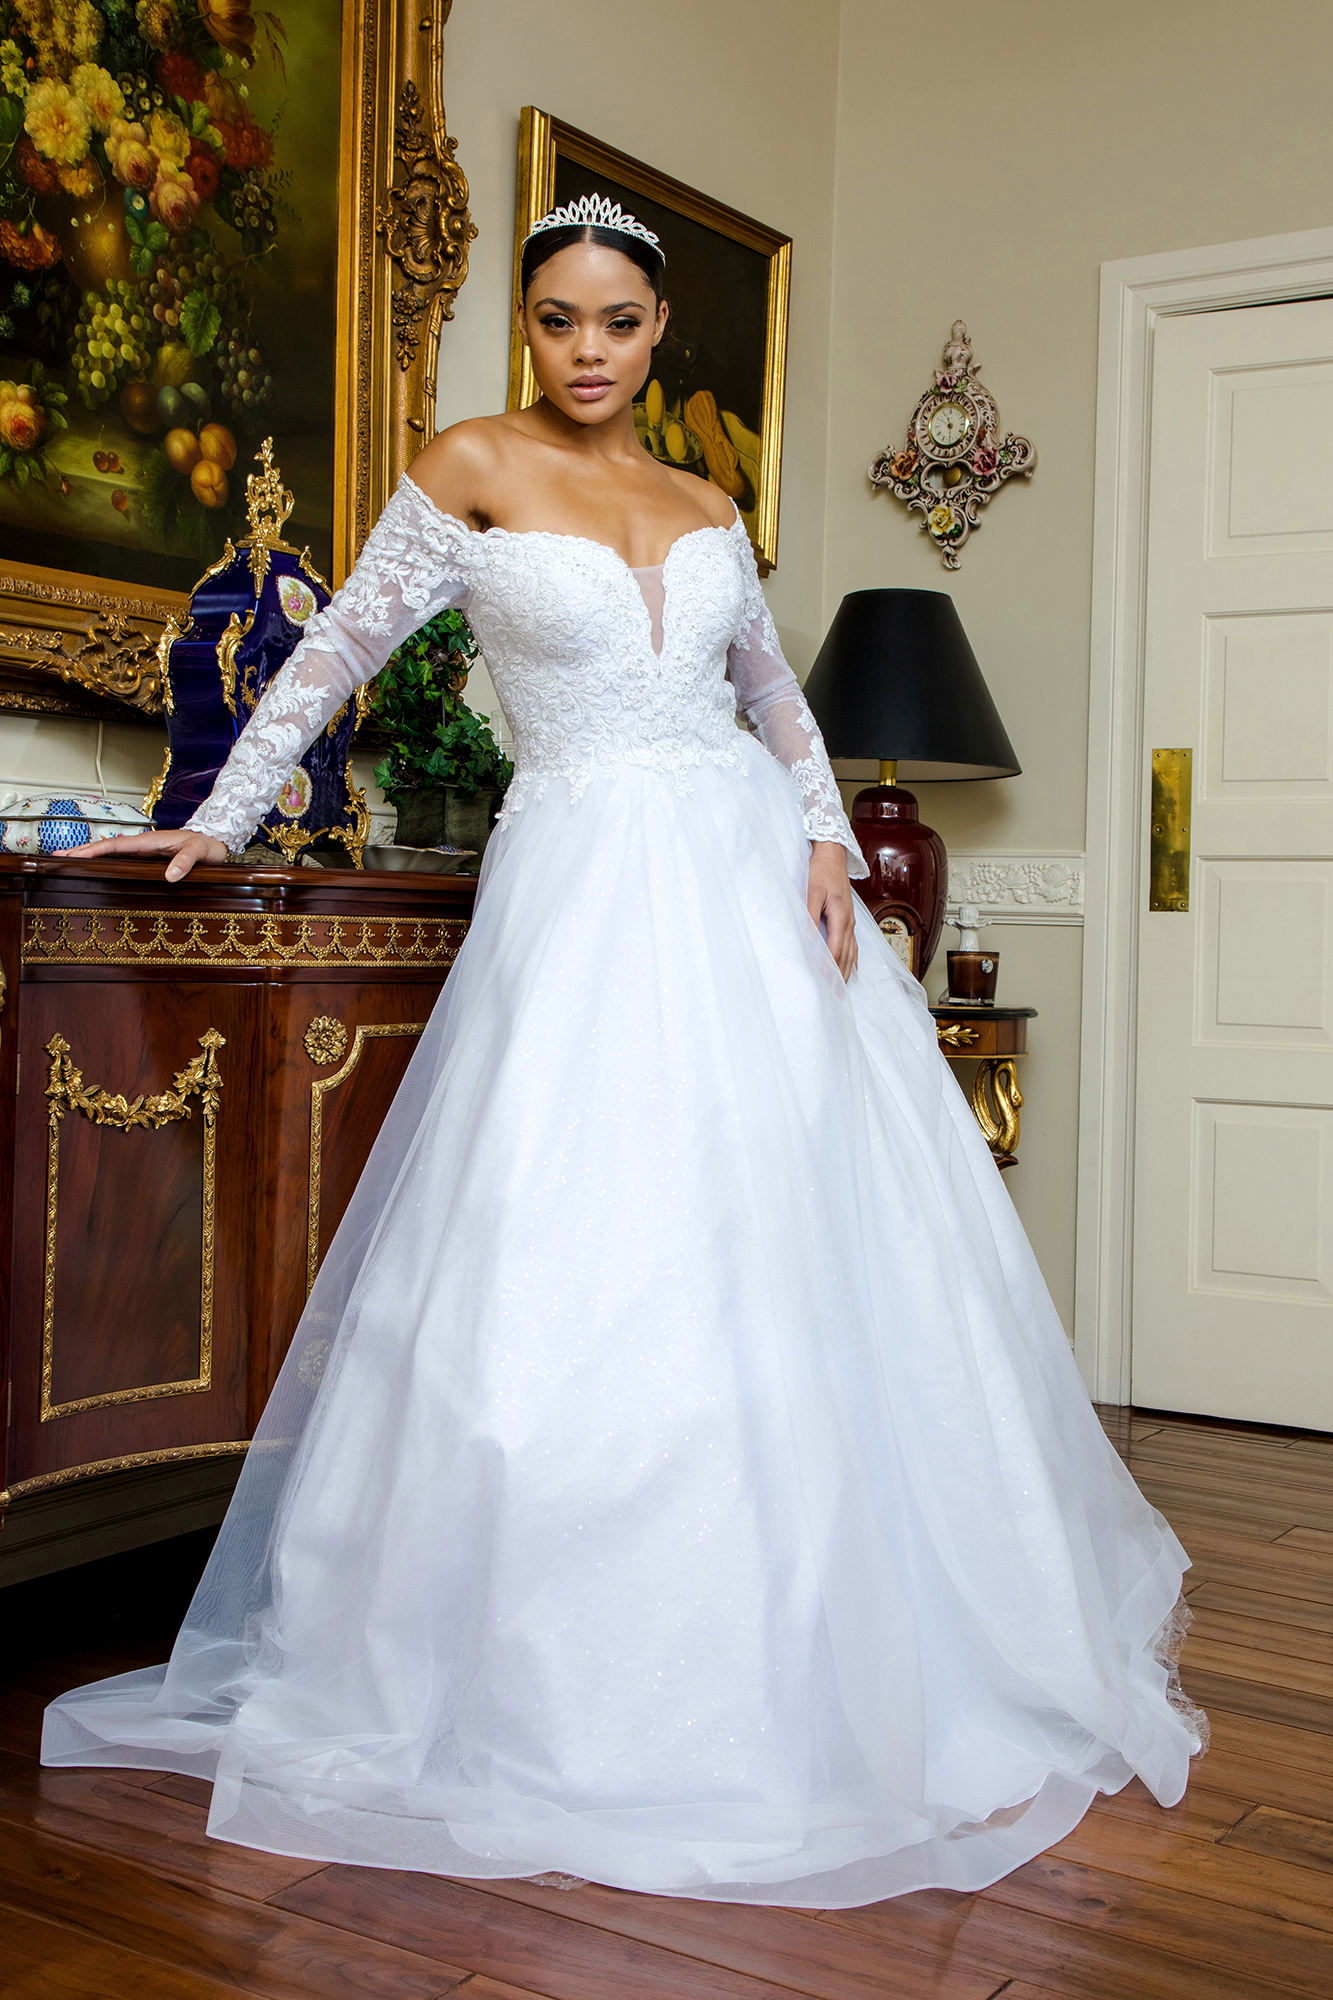 Top 25 Wedding Dresses for Chubby Arms - The Wedding Scoop